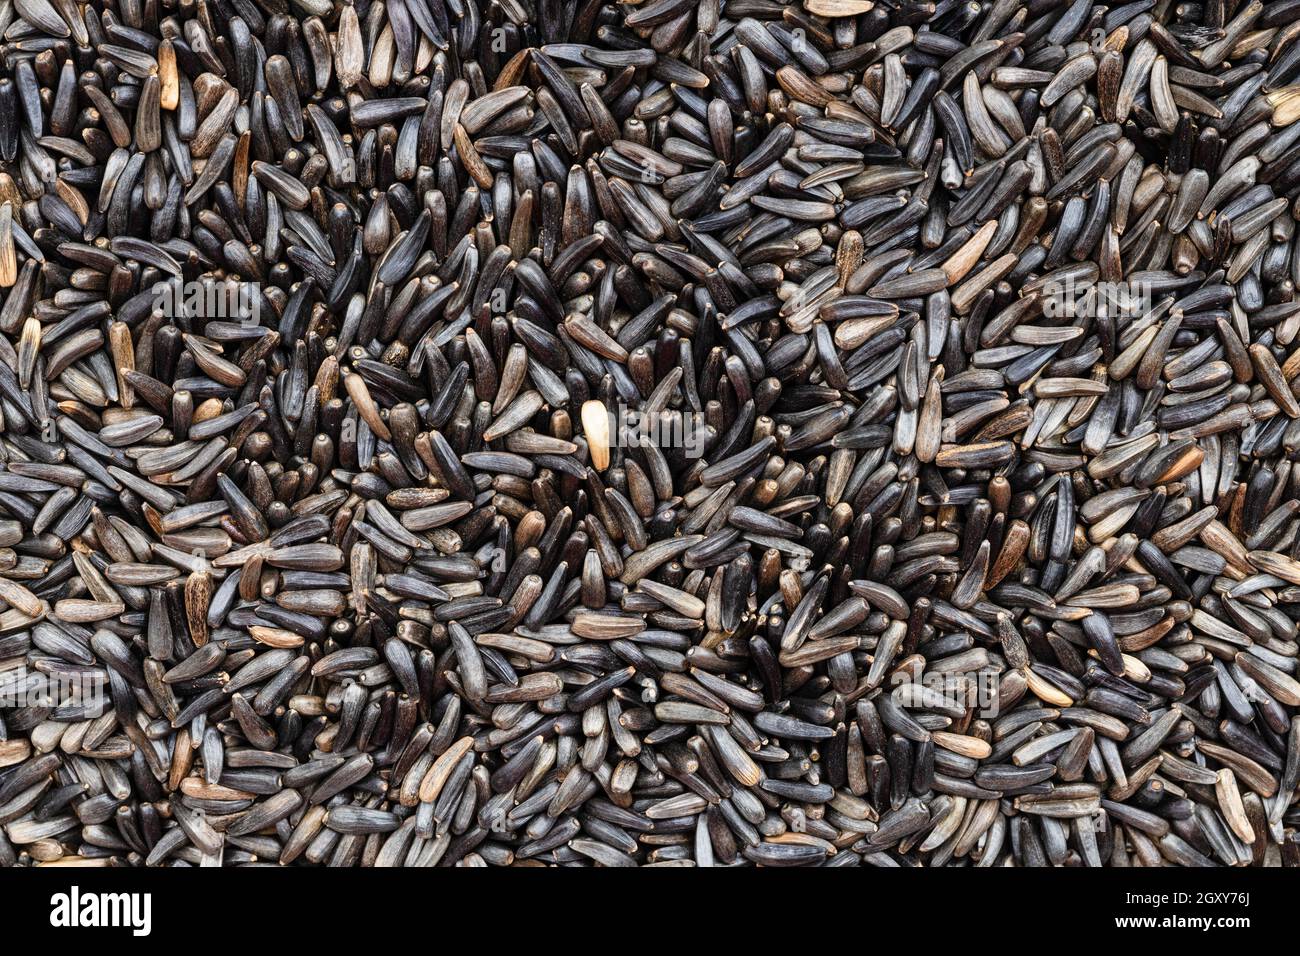 food background - many whole-grain niger seeds (Guizotia Abyssinica) close up Stock Photo